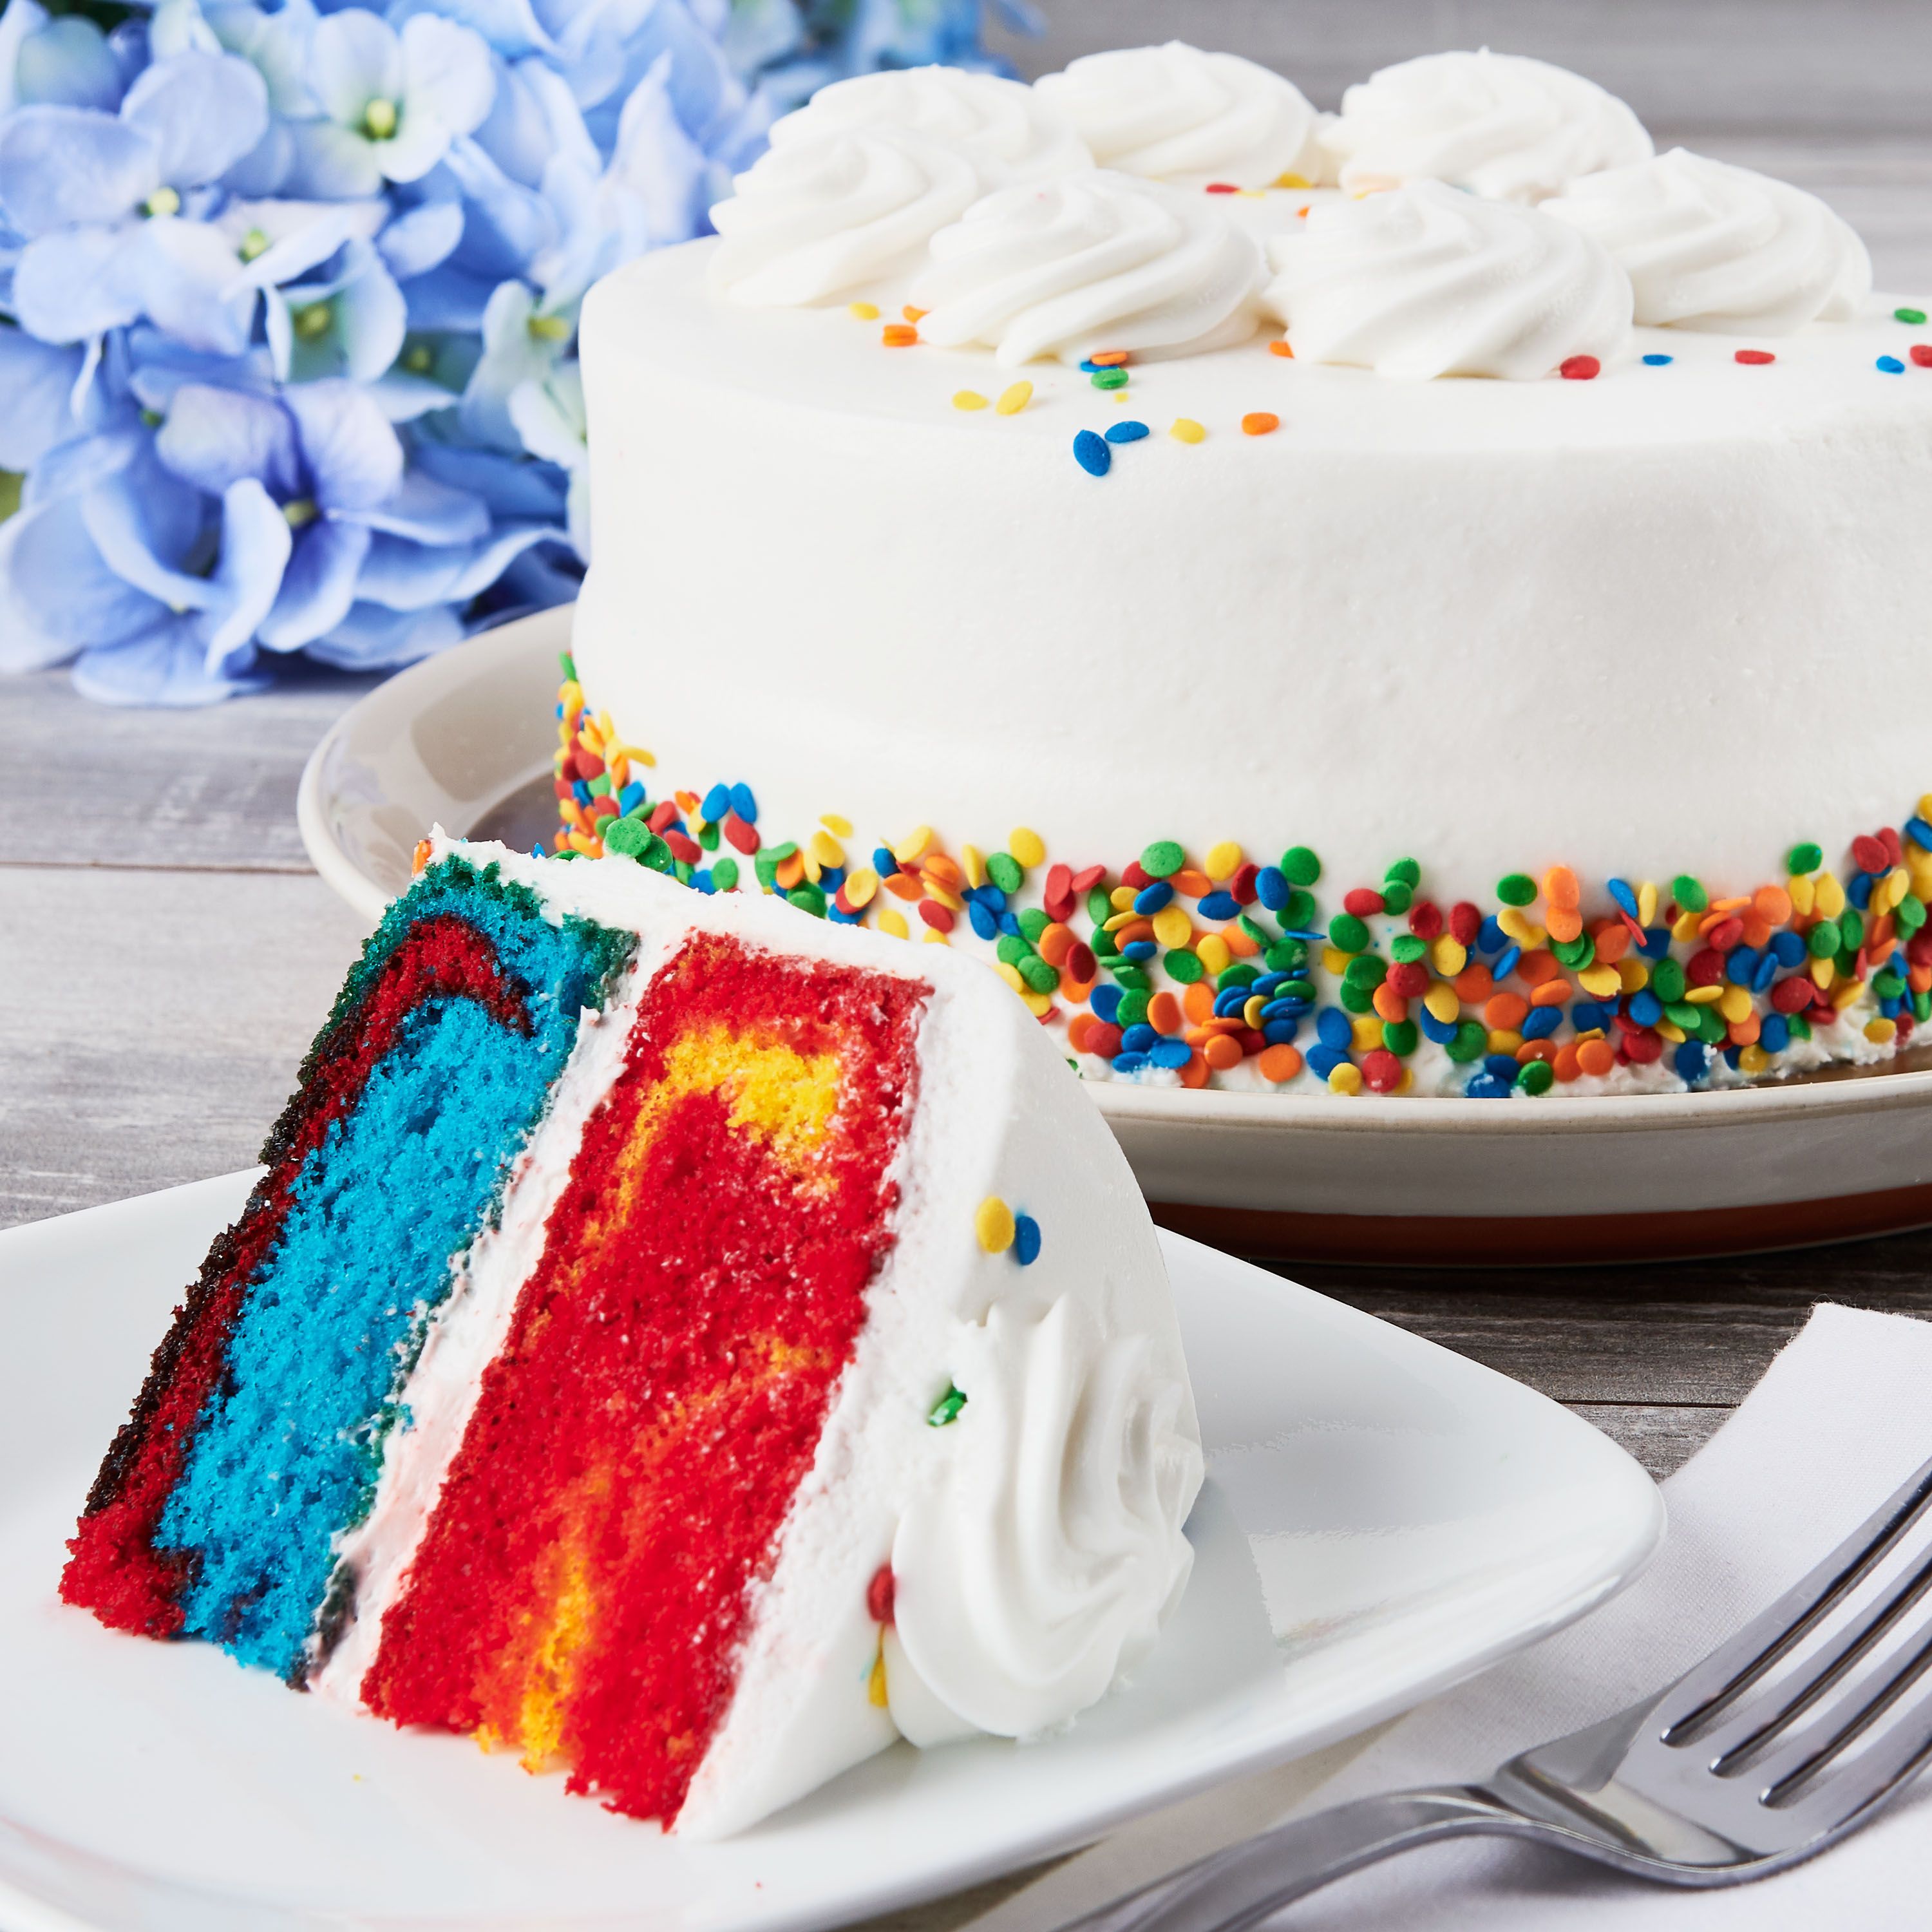 You Can Buy A Rainbow Cake At Walmart